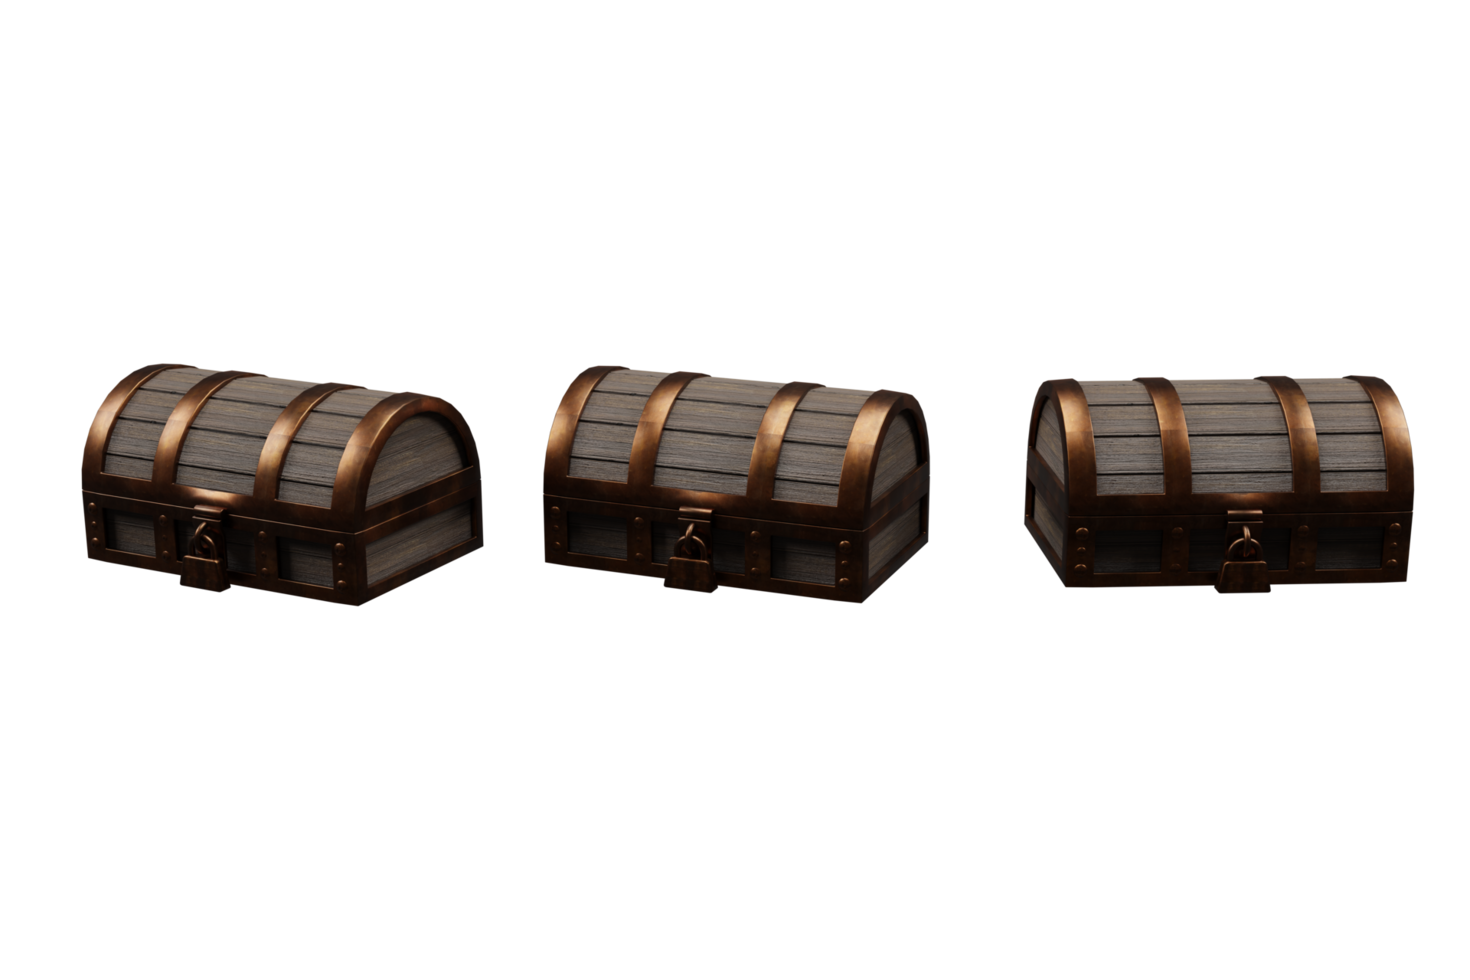 Treasure chest against Old wooden  3d illustration png